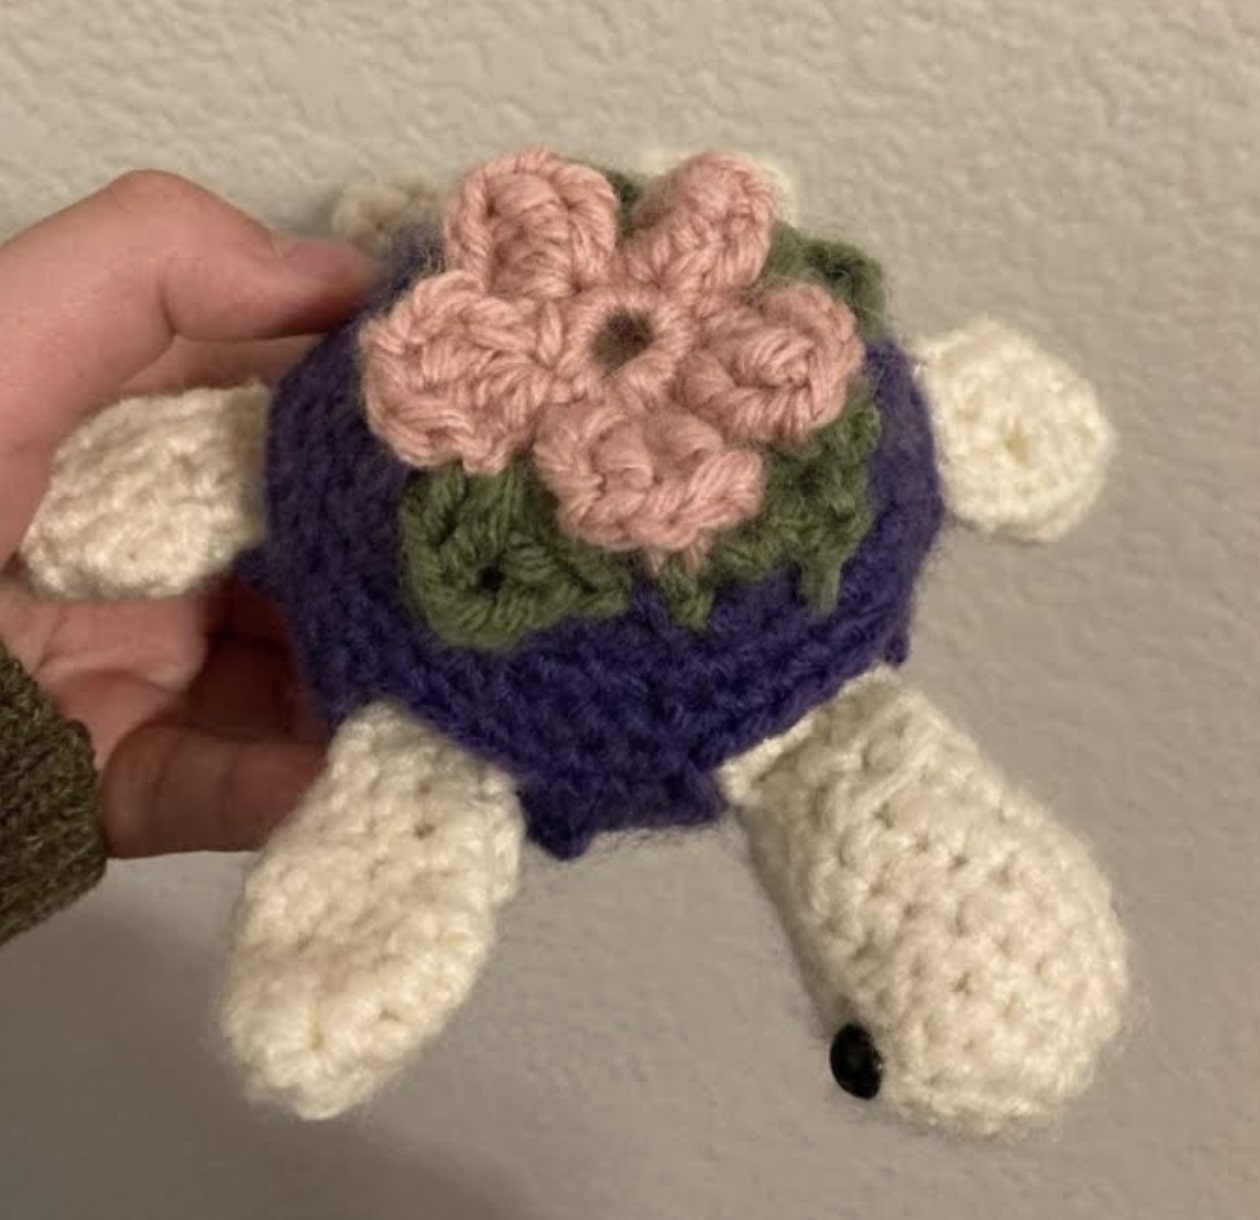 A picture of a hand holding a small crocheted turtle with a flower on its back